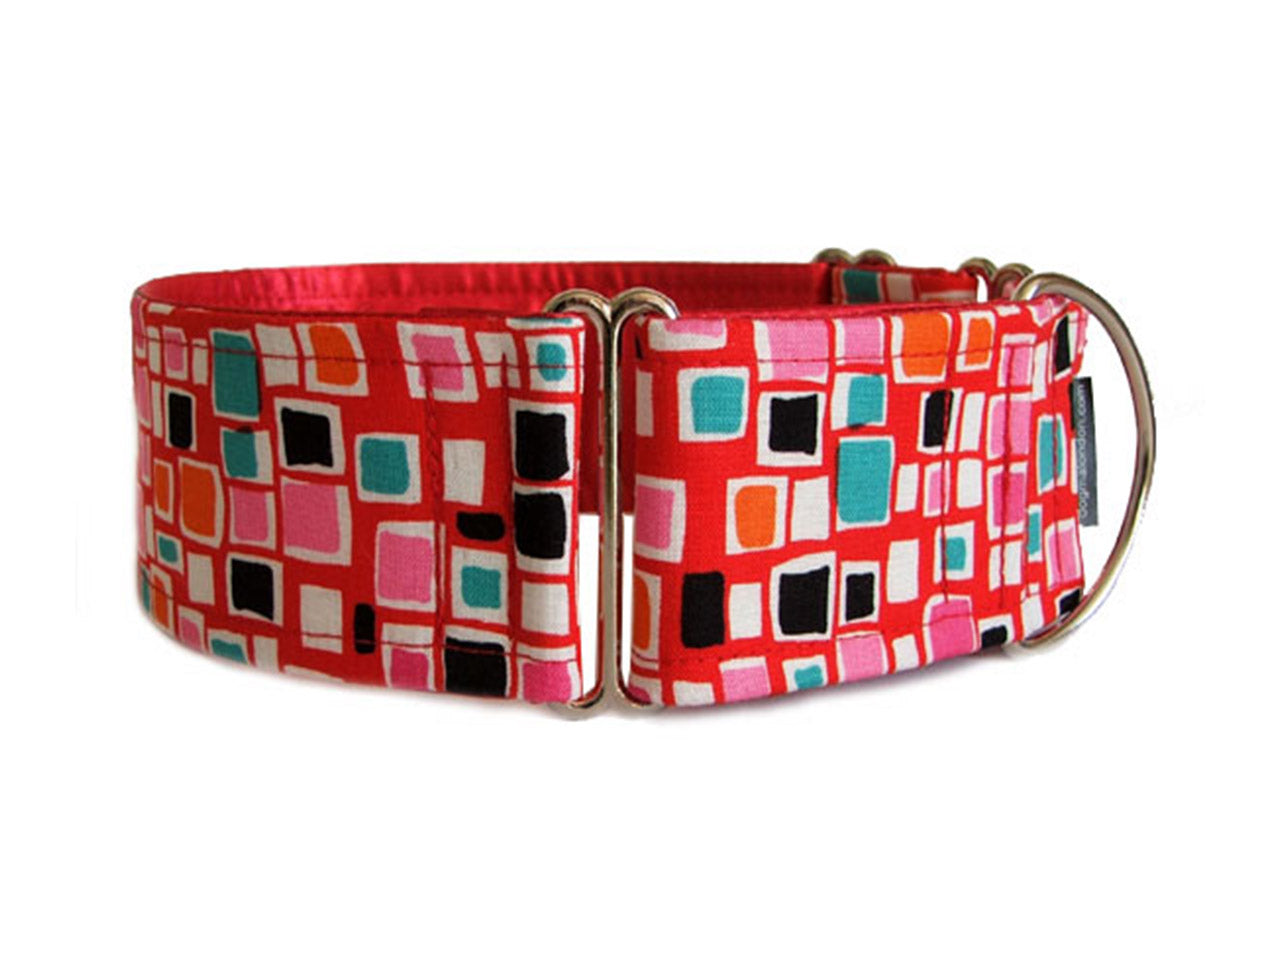 Pops of color on bright red make a snazzy accessory for any fashion-forward hound!